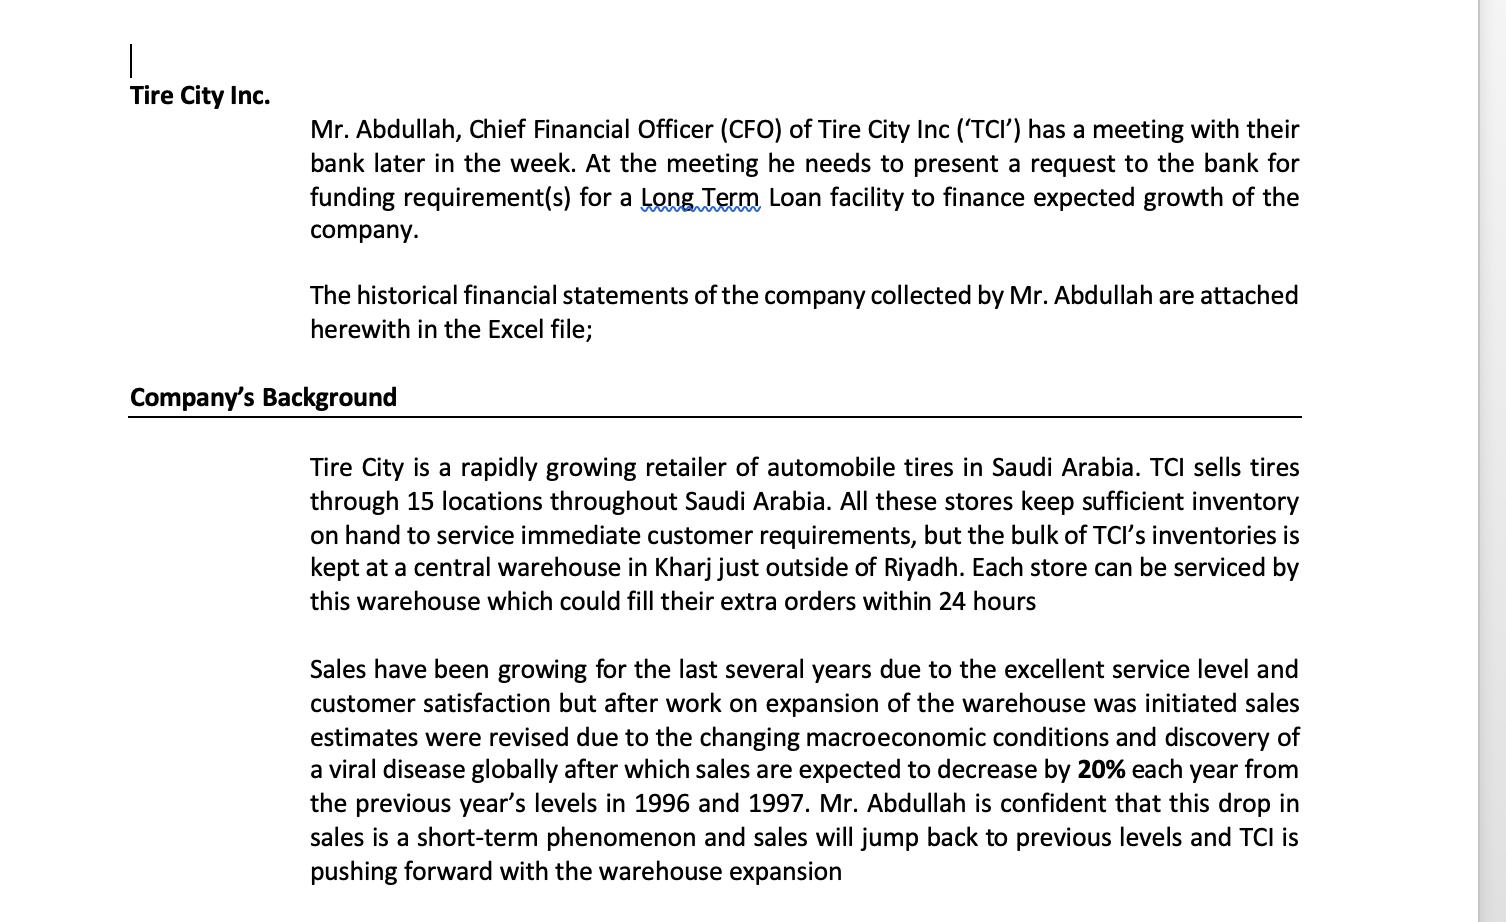 1 Tire City Inc. Mr. Abdullah, Chief Financial Officer (CFO) of Tire City Inc (TCI) has a meeting with their bank later in